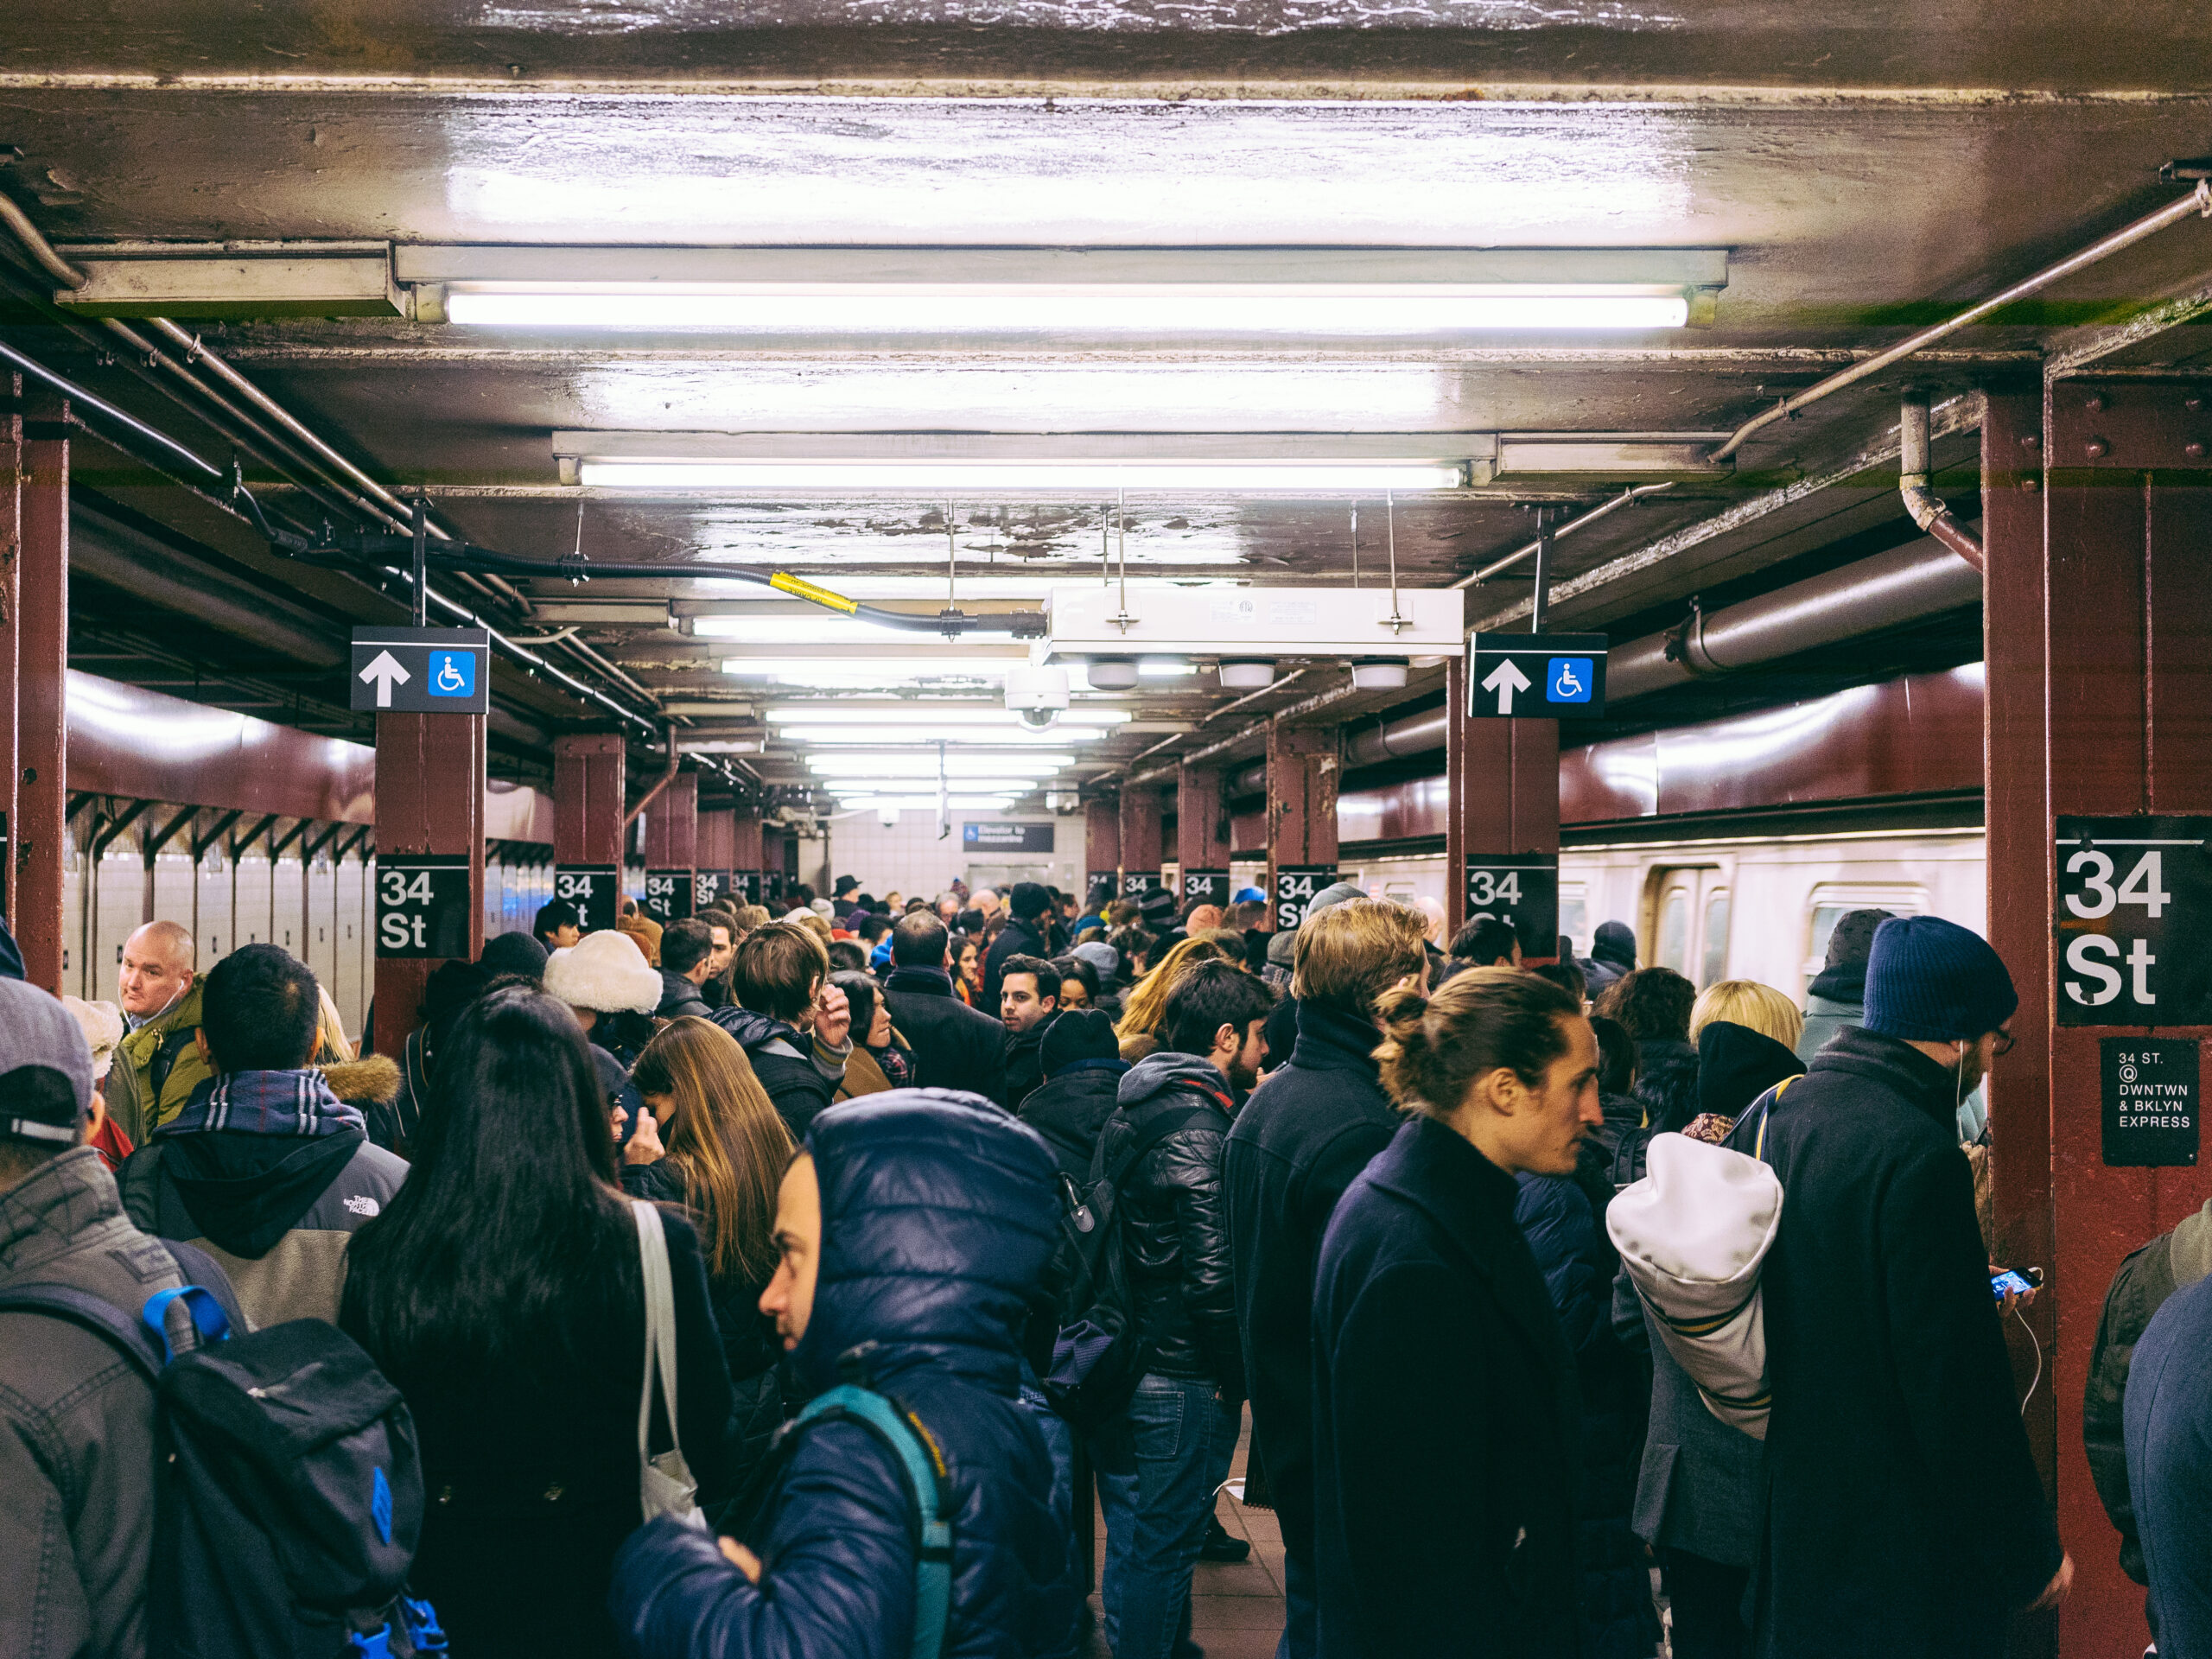 Traces Of Bubonic Plague And Dysentery Found In New York’s Subway System